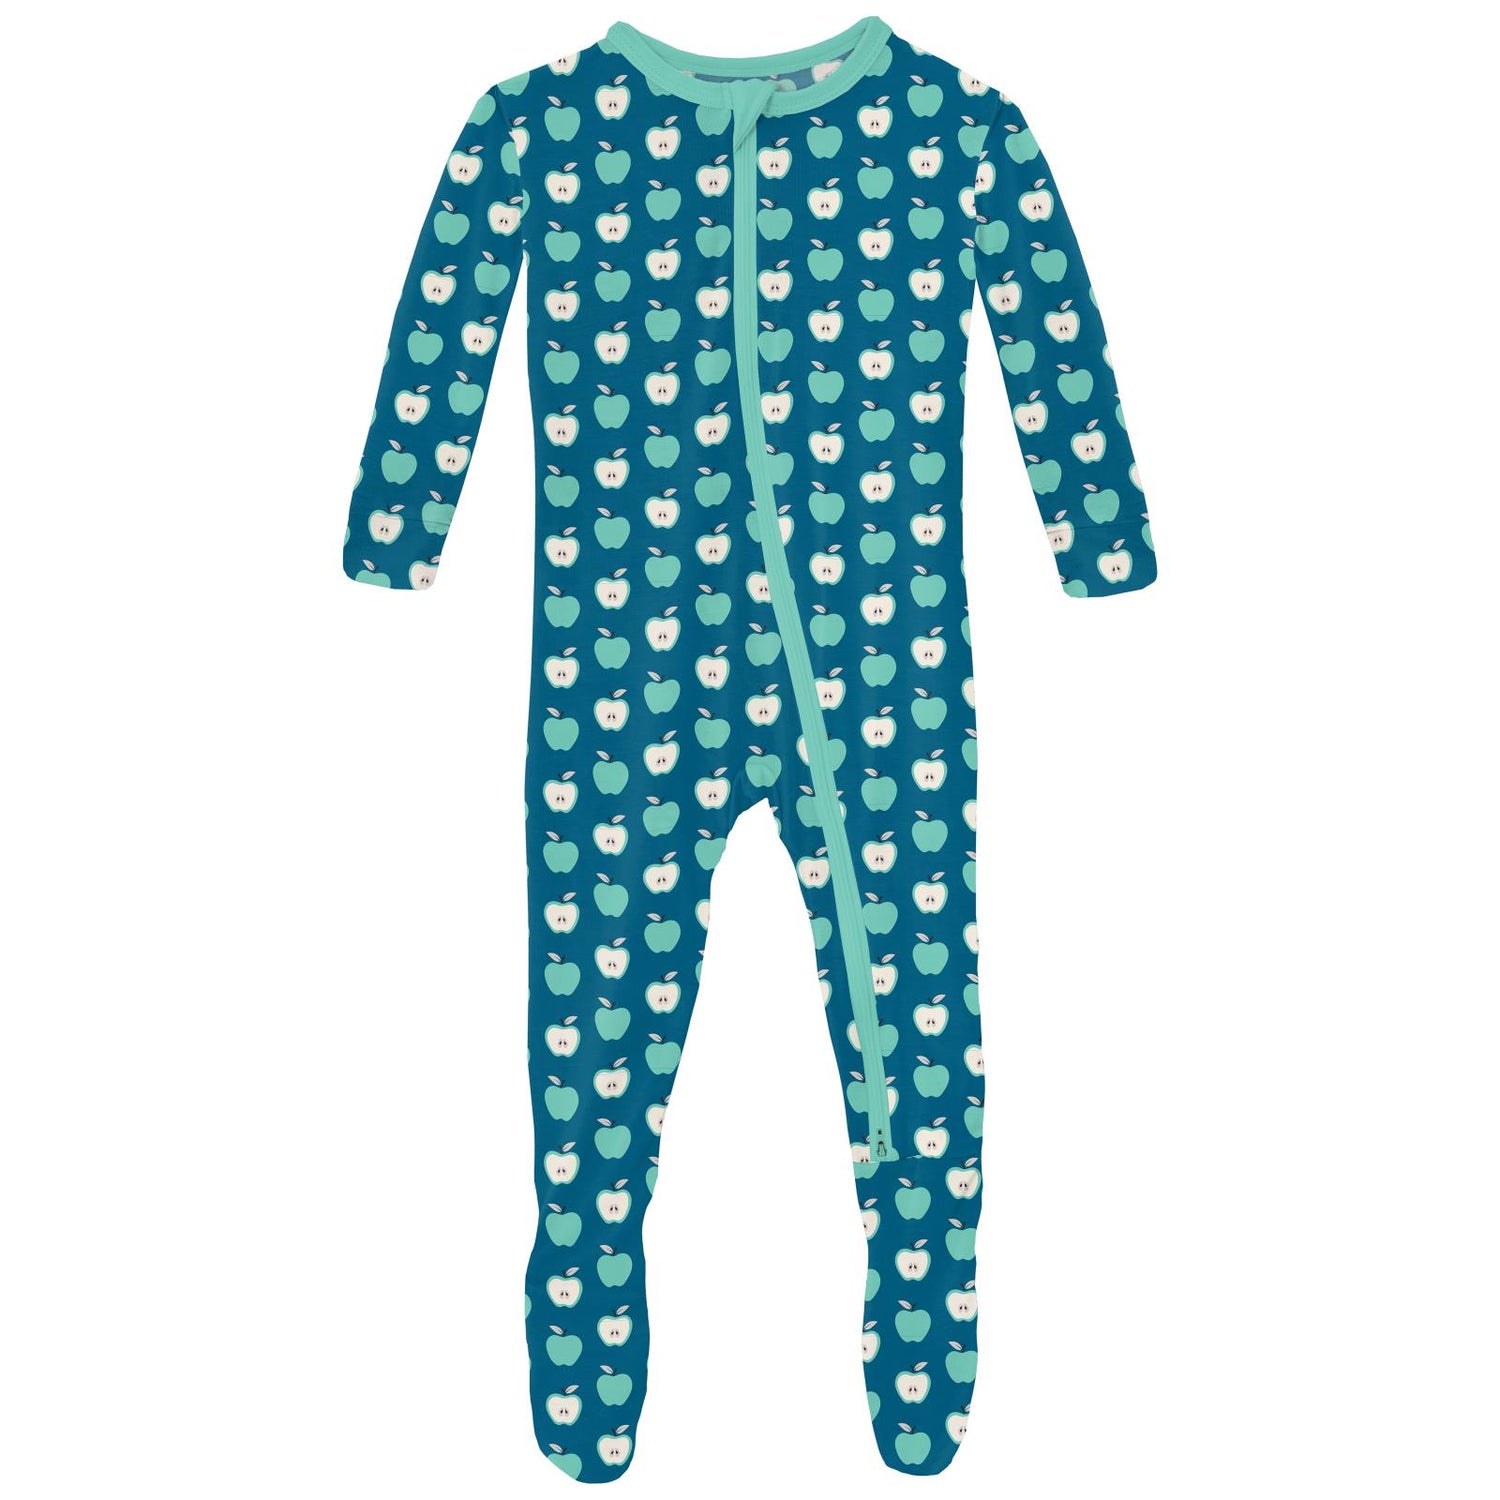 Print Footie with 2 Way Zipper in Seaport Johnny Appleseed